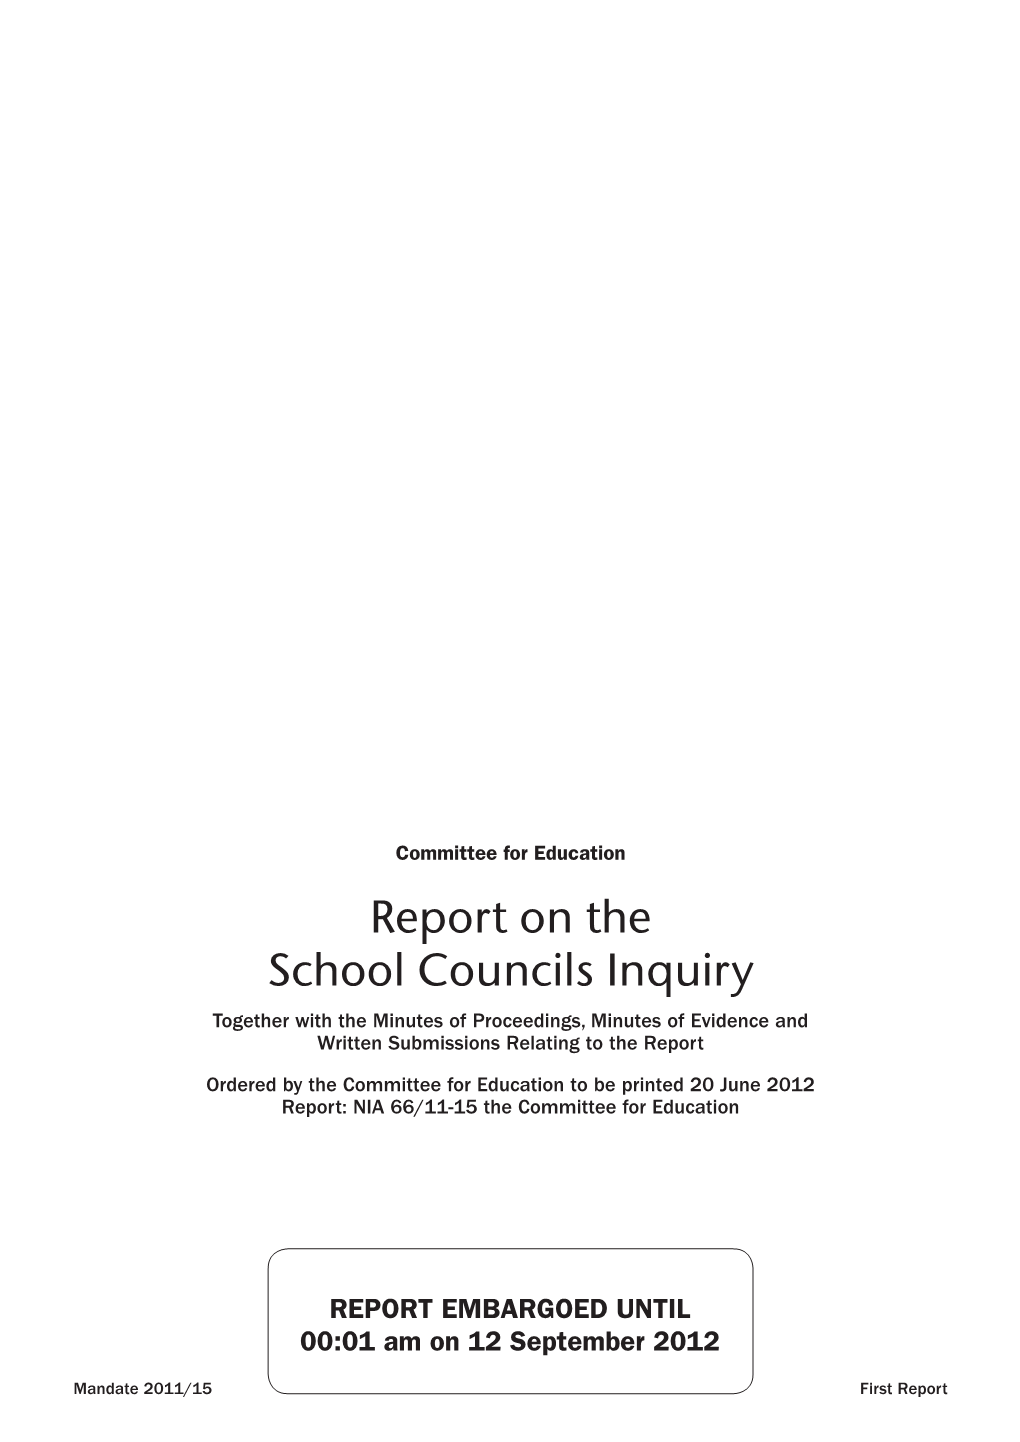 Report on the School Councils Inquiry Together with the Minutes of Proceedings, Minutes of Evidence and Written Submissions Relating to the Report